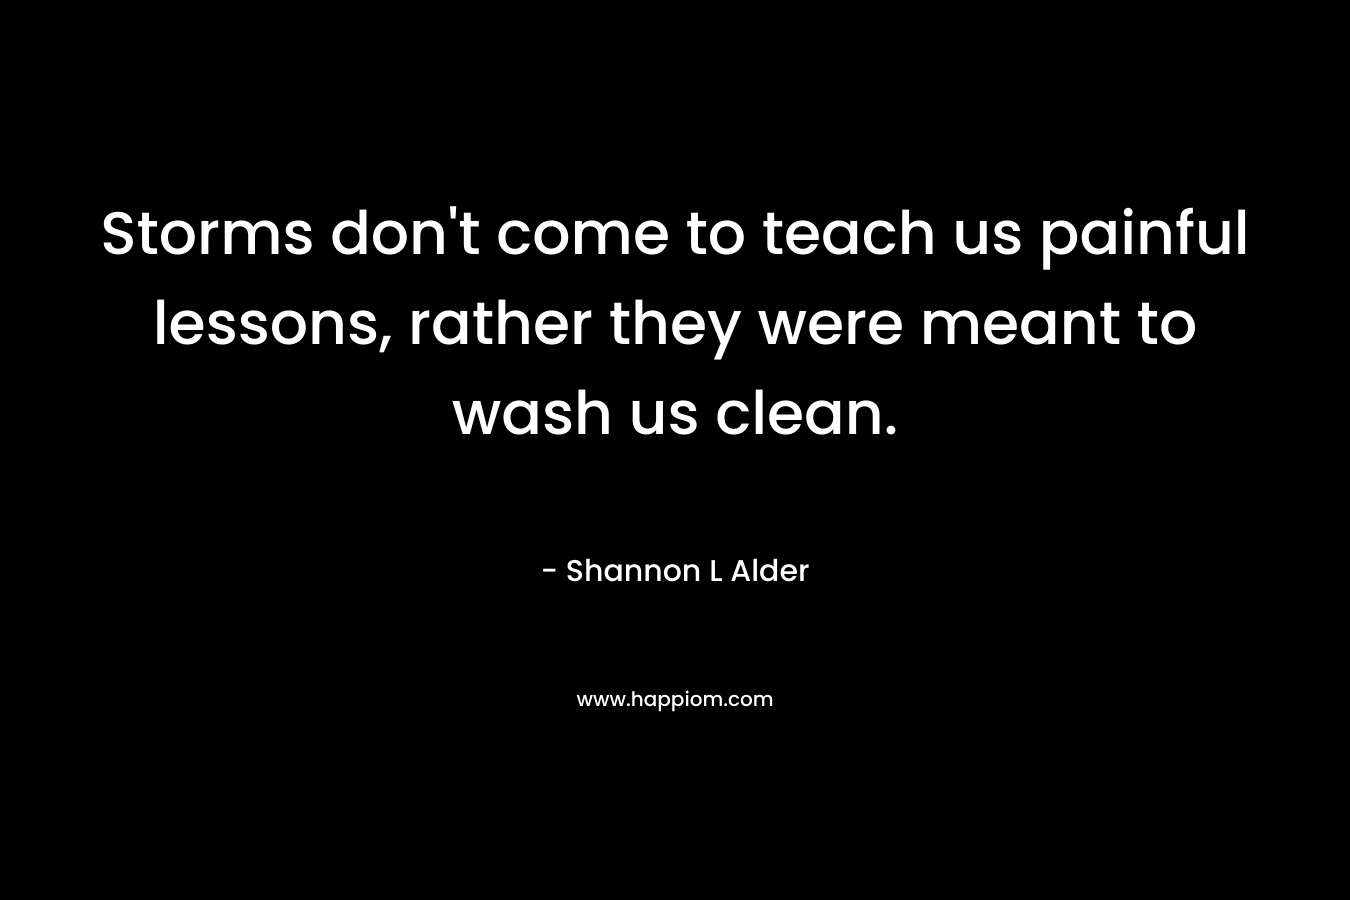 Storms don't come to teach us painful lessons, rather they were meant to wash us clean.